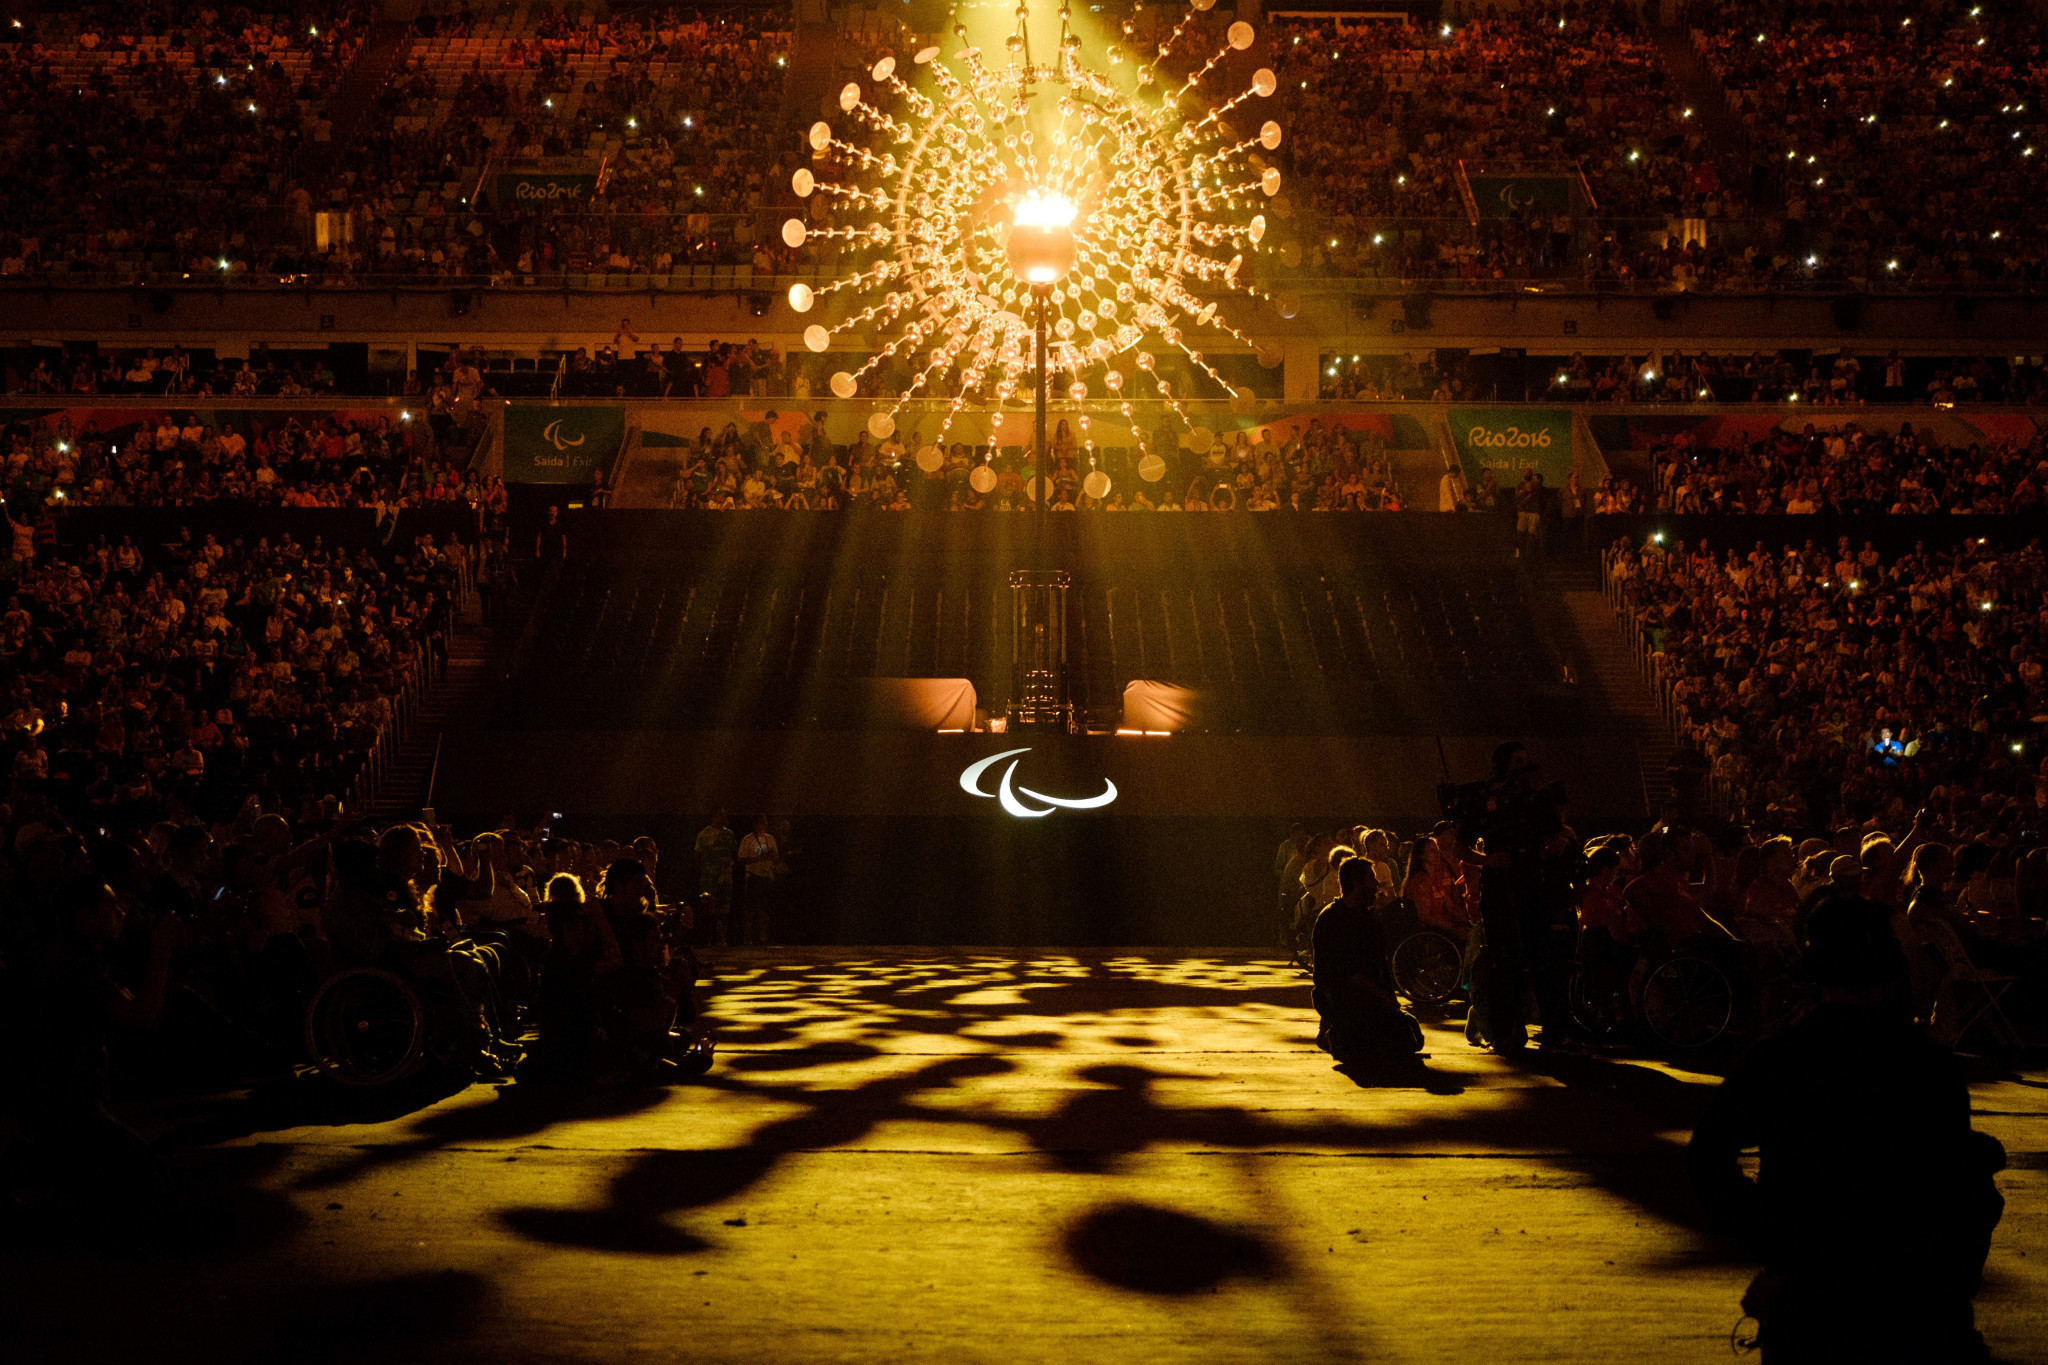 The Olympic Caldron is seen during the closing ceremony of the Rio 2016 Paralympic Games at the Maracana stadium in Rio de Janeiro on September 18, 2016 ©Getty Images